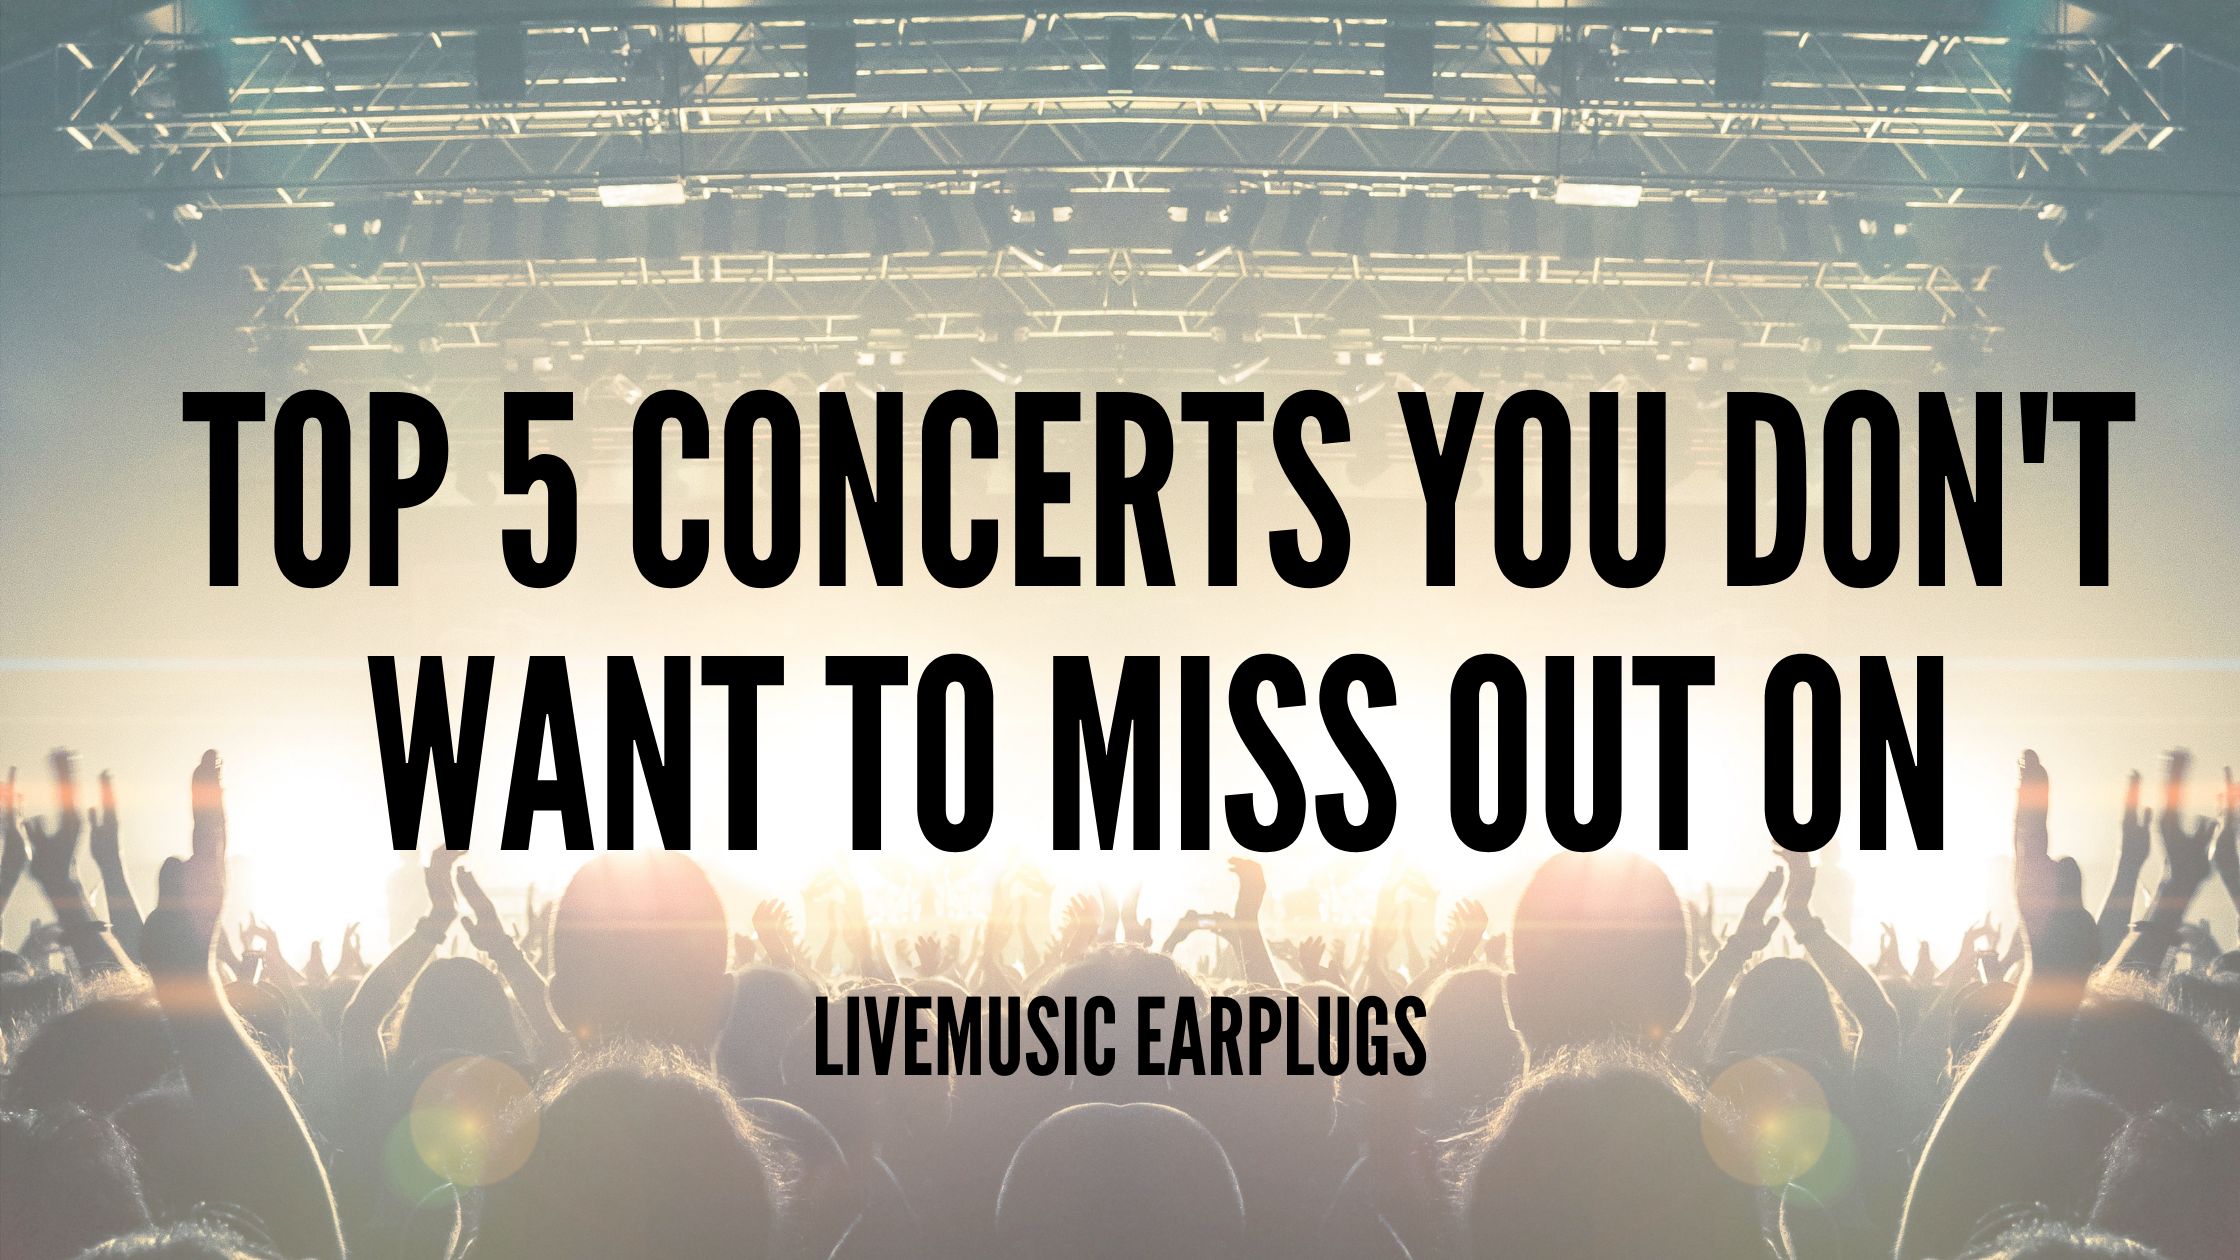 Top 5 Concerts You Don’t Want to Miss Out On